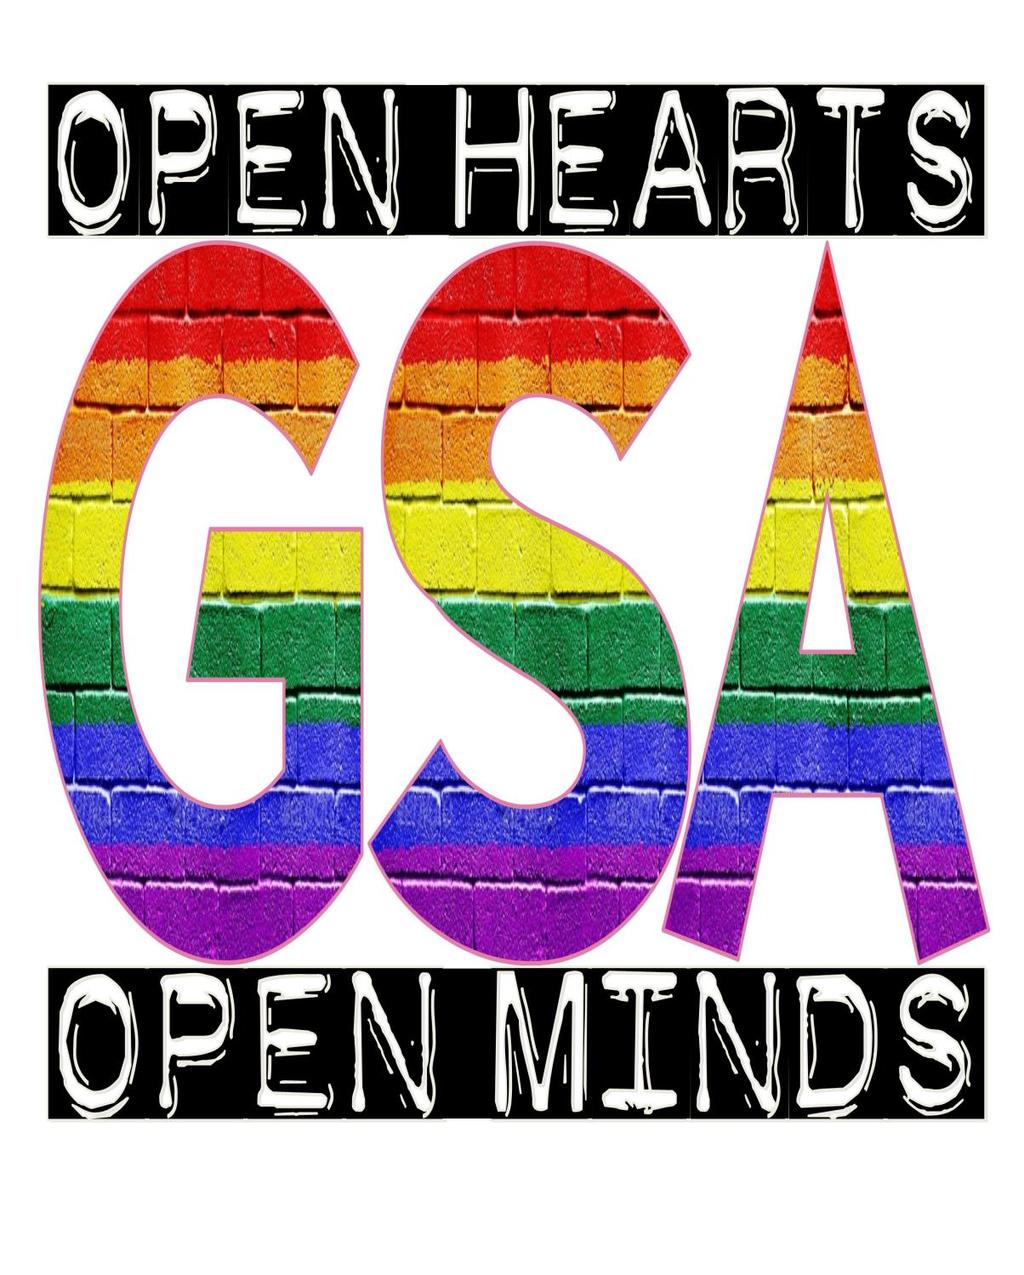 GSA will be meeting on Thursday, January 10 2:15pm